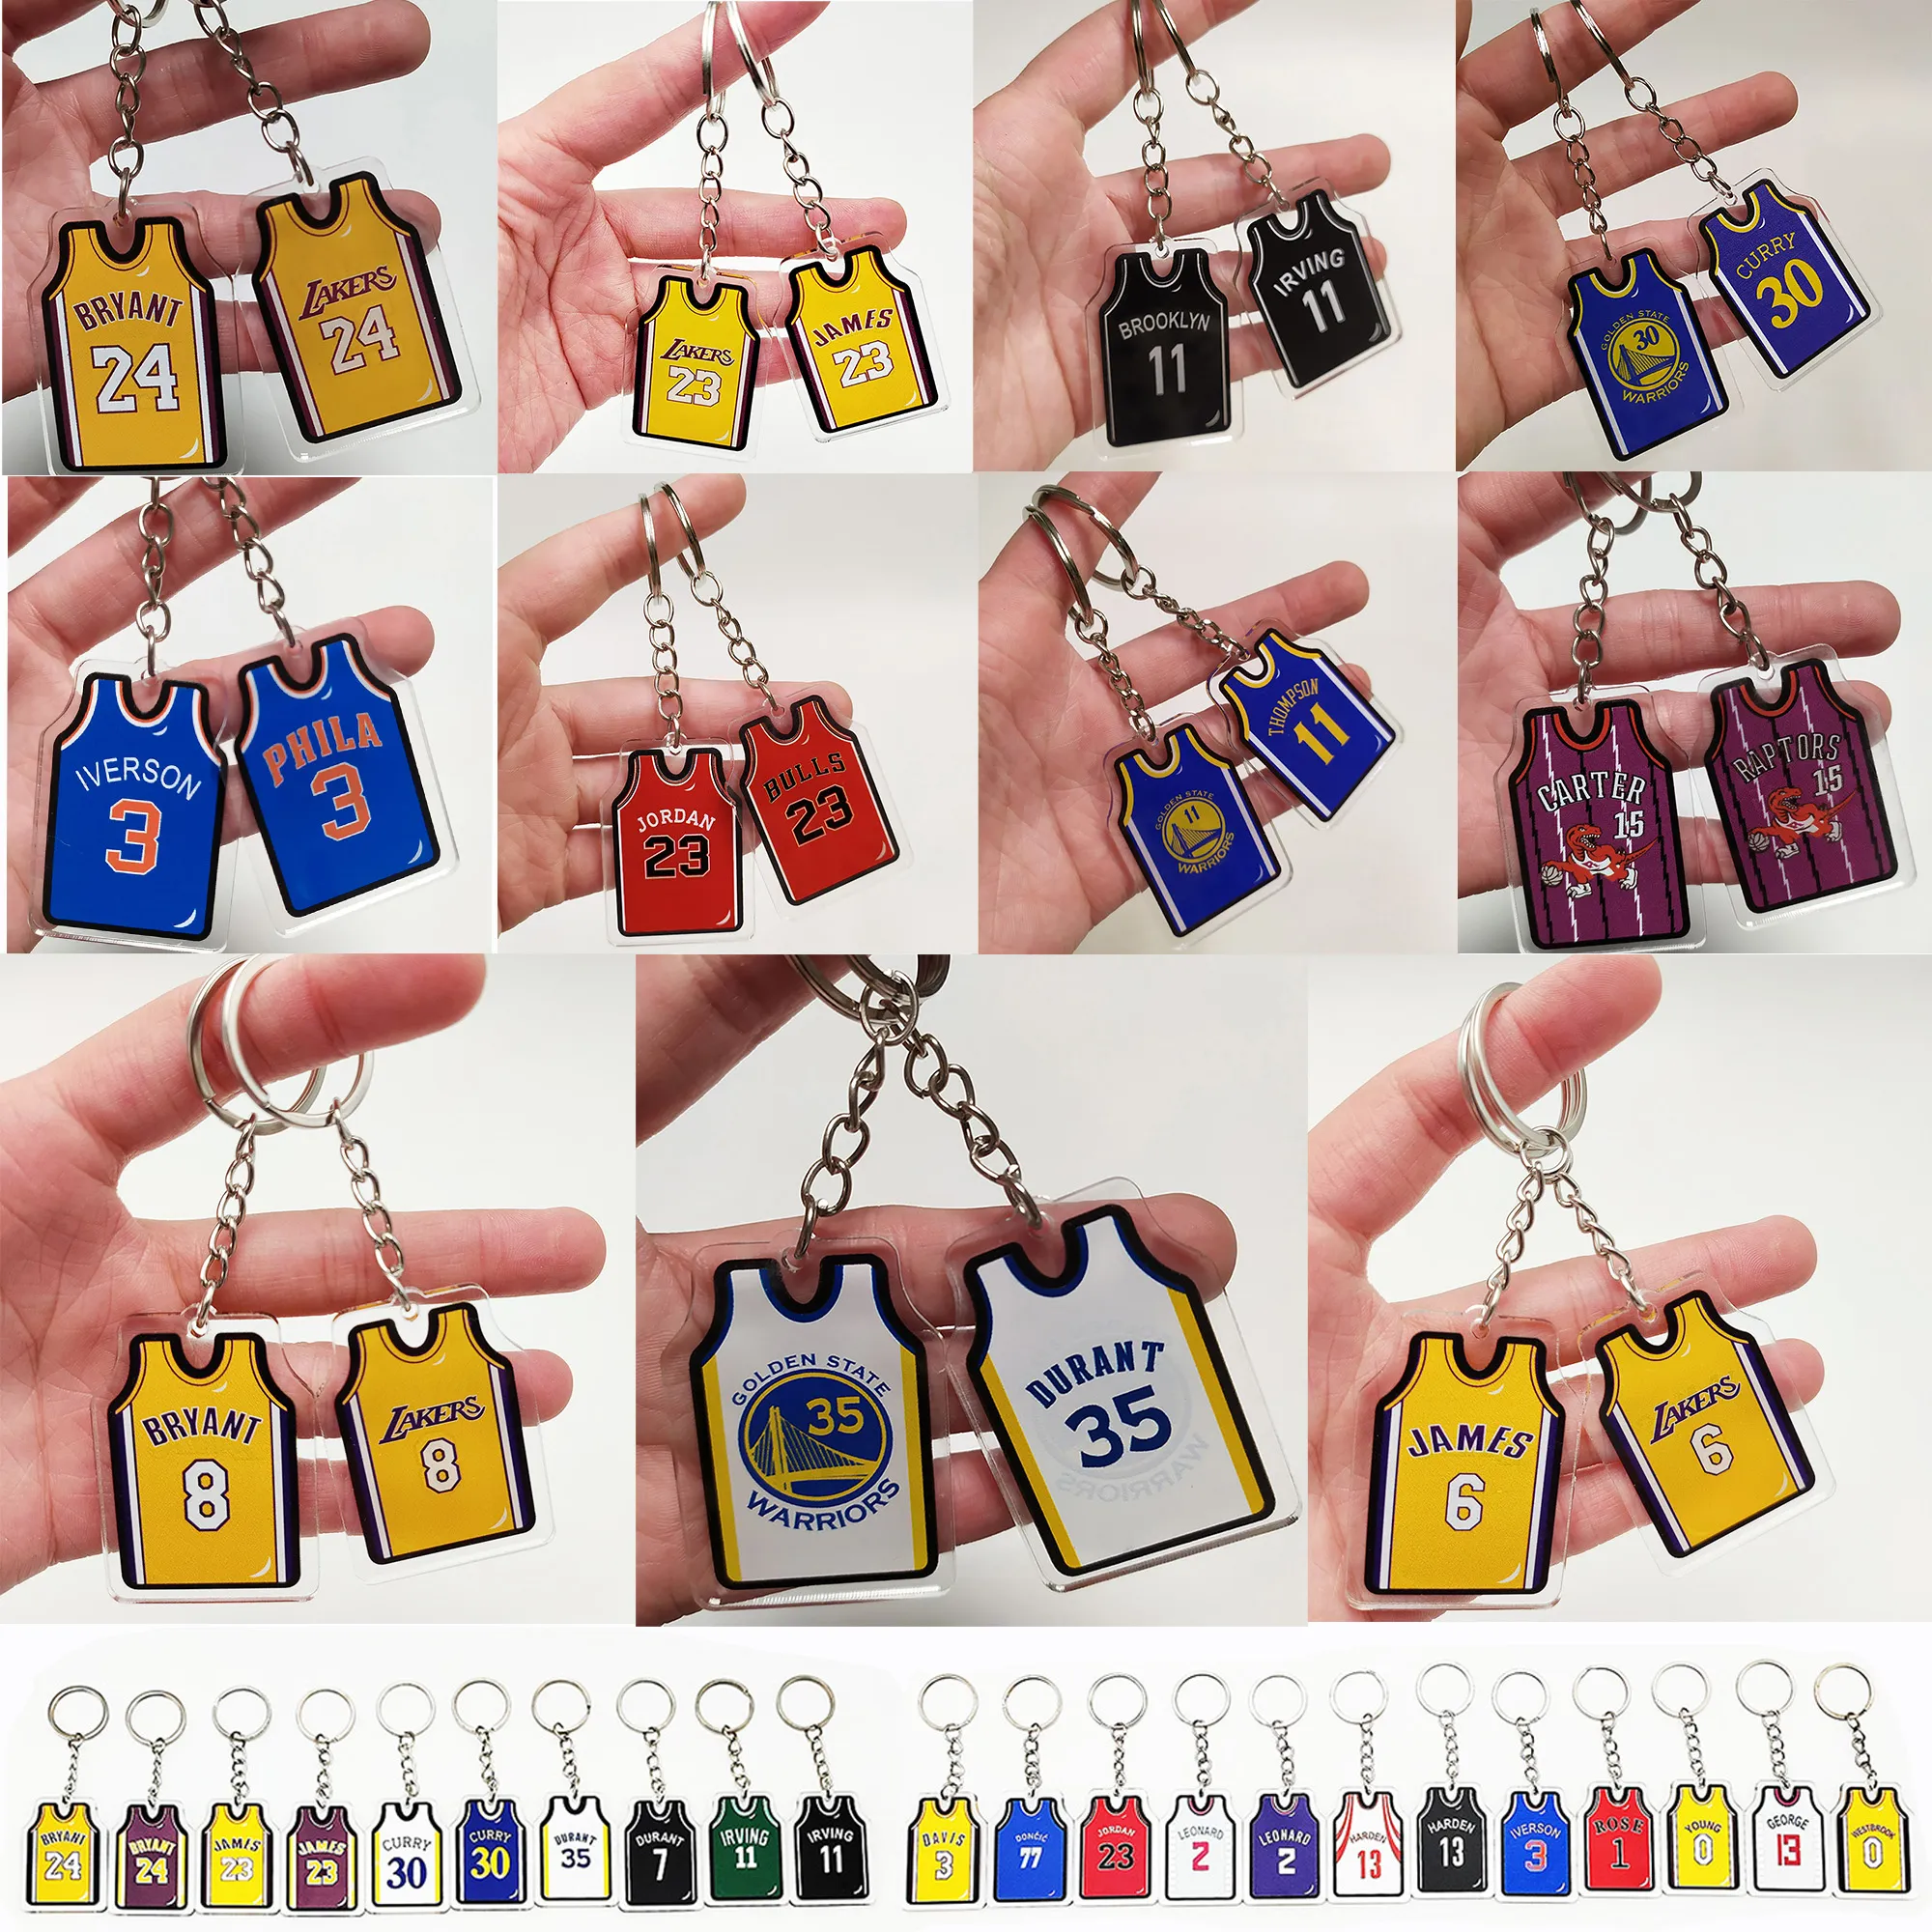 basketball star jersey keychain fashion sport celebrity figure backpack pendant different patterns on both sides key chain gifts for fans memorabilia